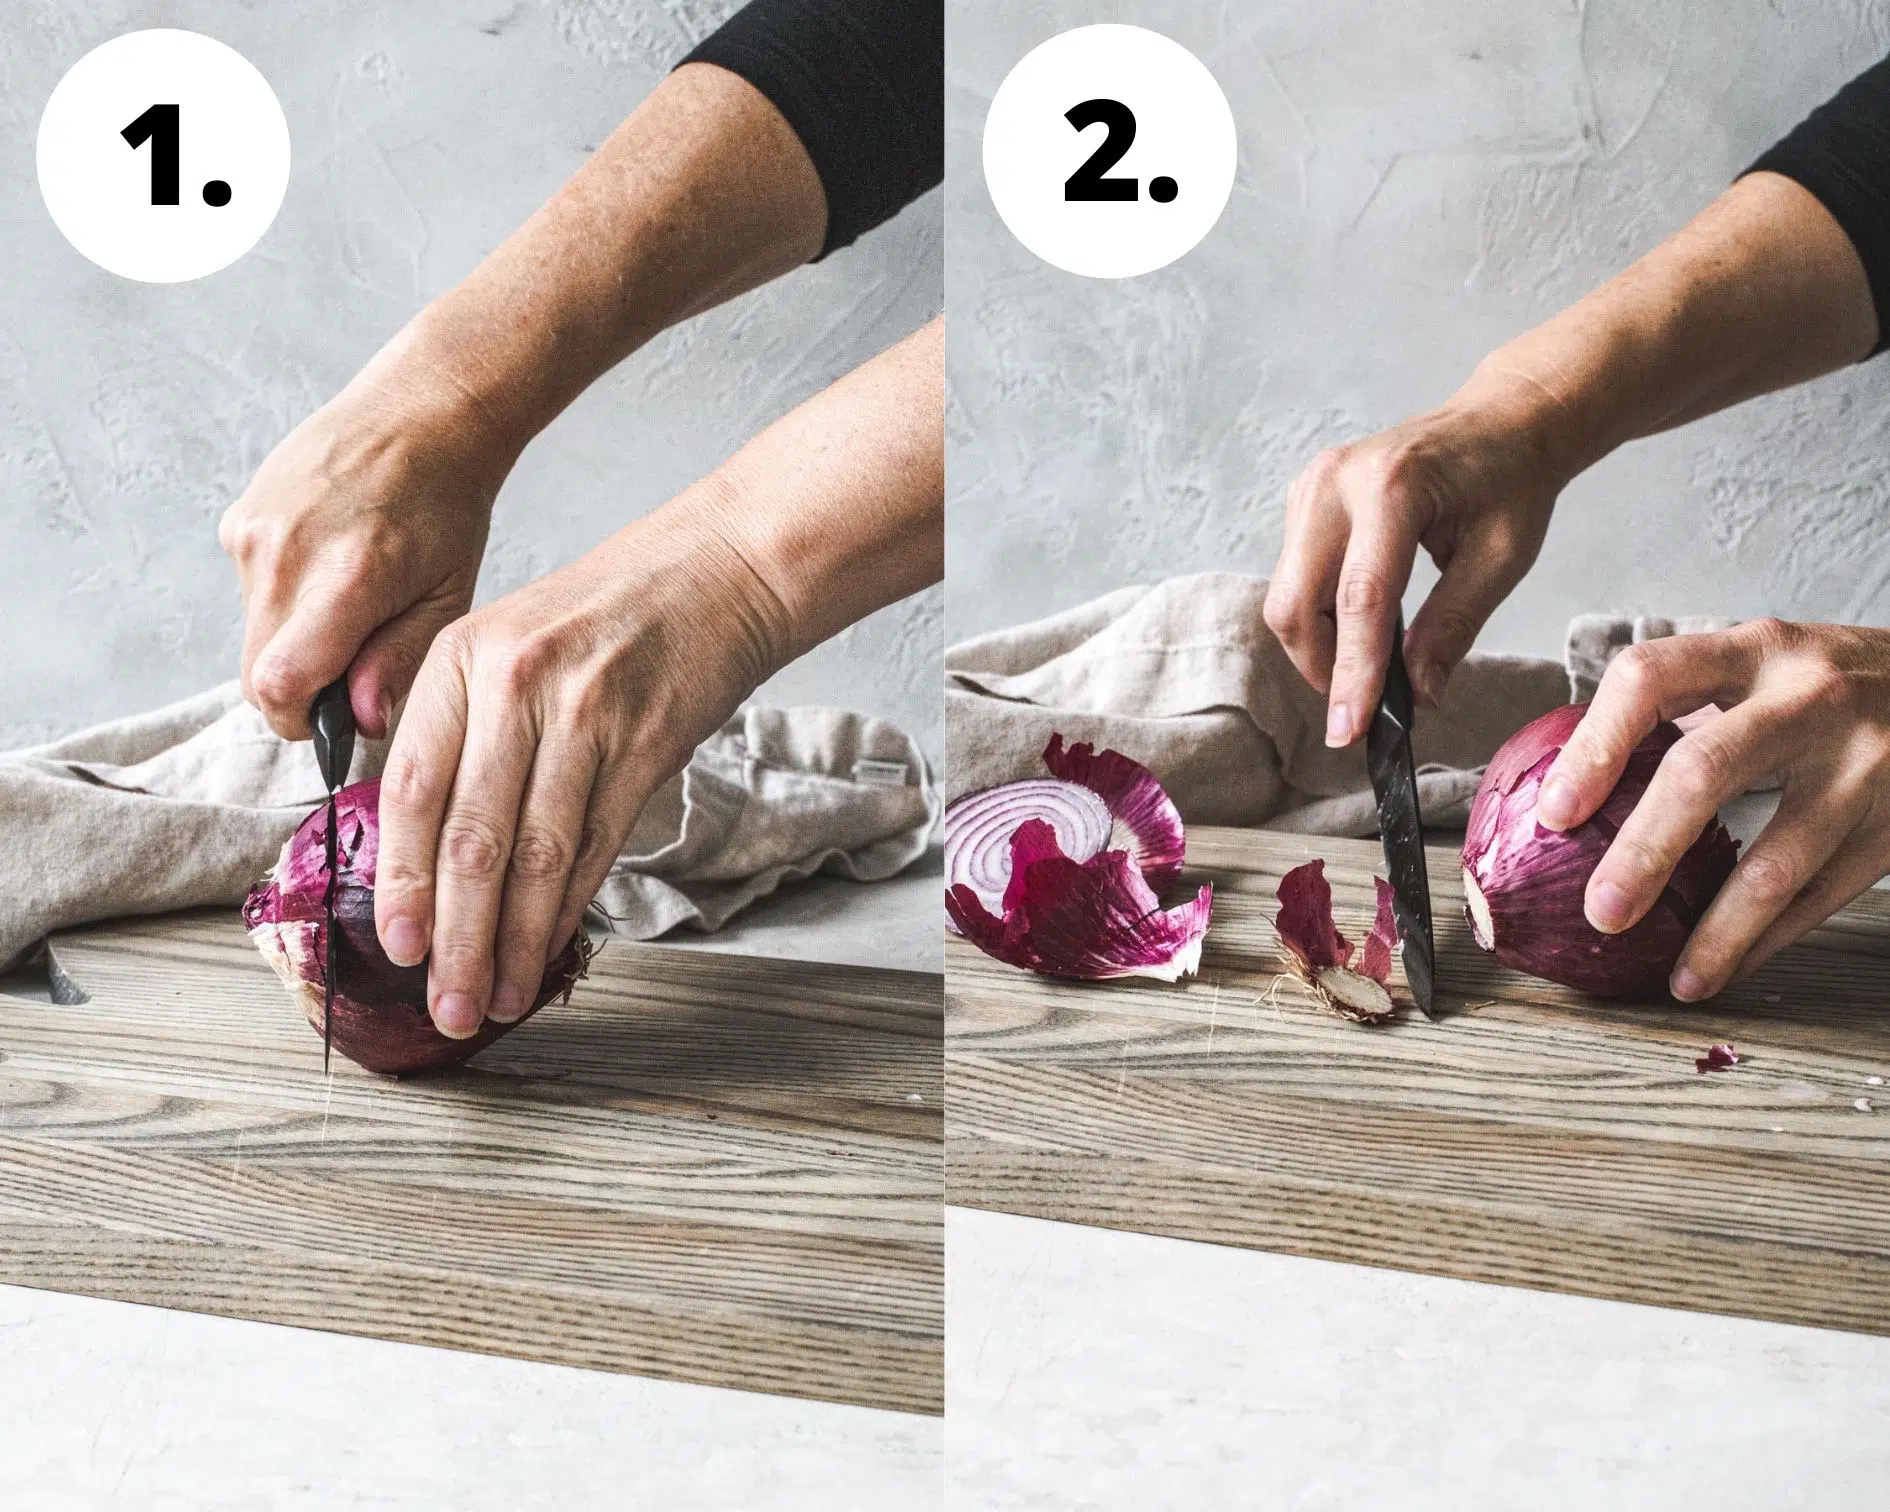 Process steps 1 and 2 for cutting an onion crosswise.